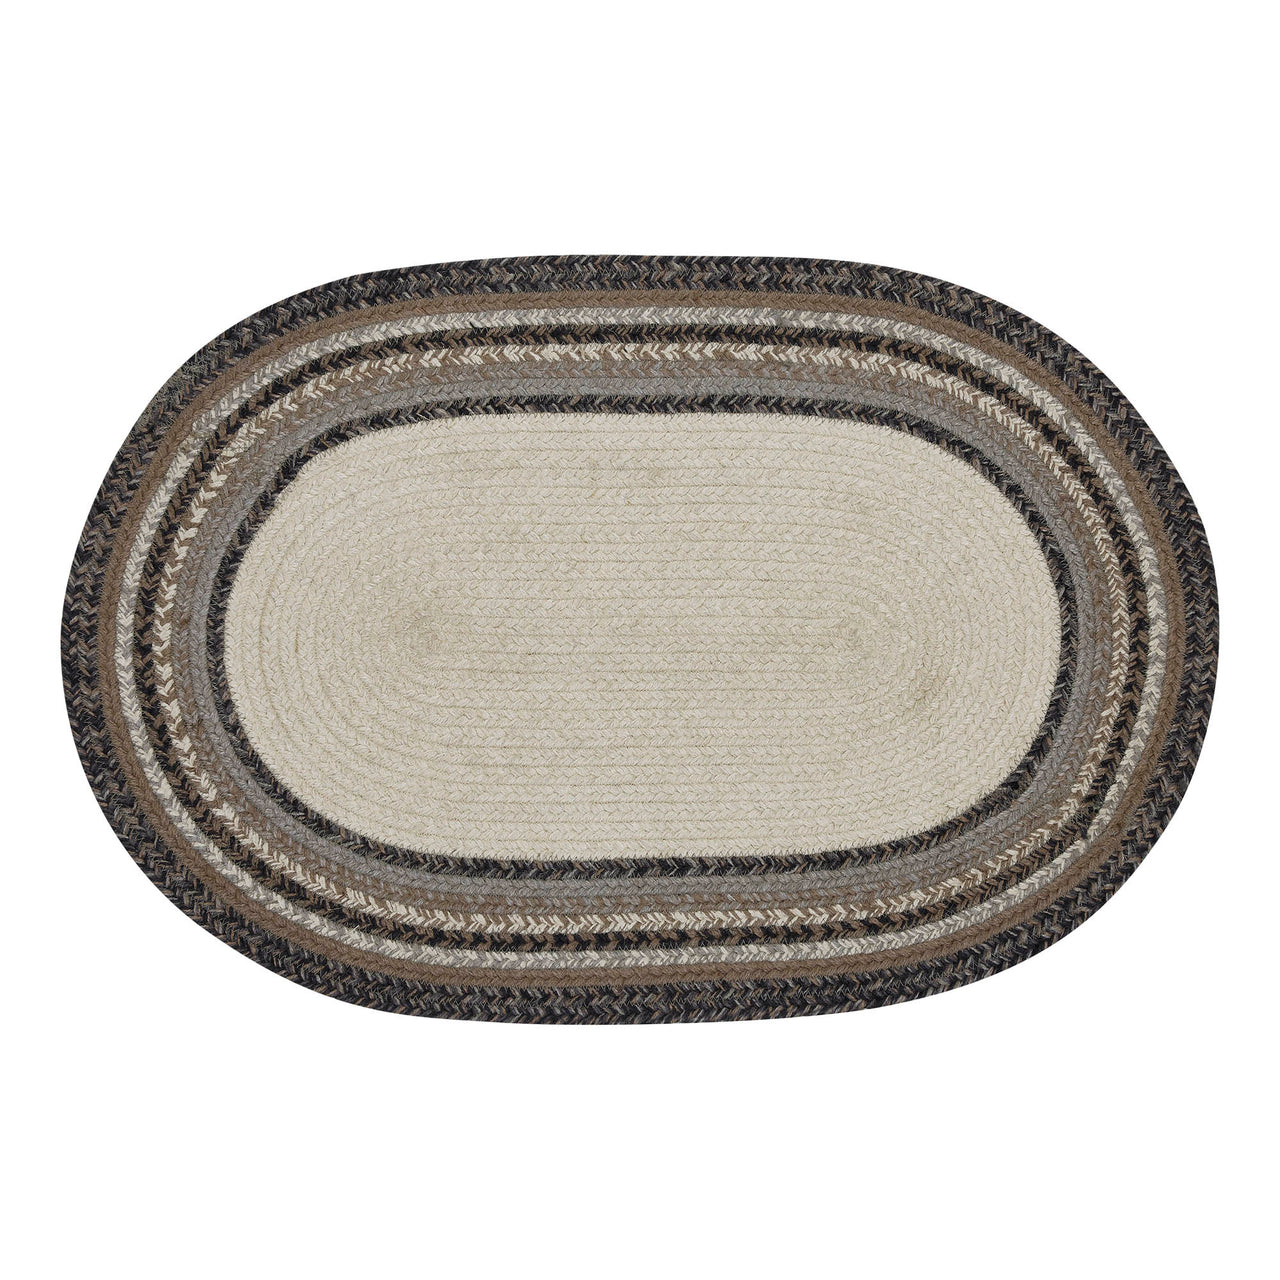 Floral Vine Jute Braided Rug Oval with Rug Pad 20"x30" VHC Brands